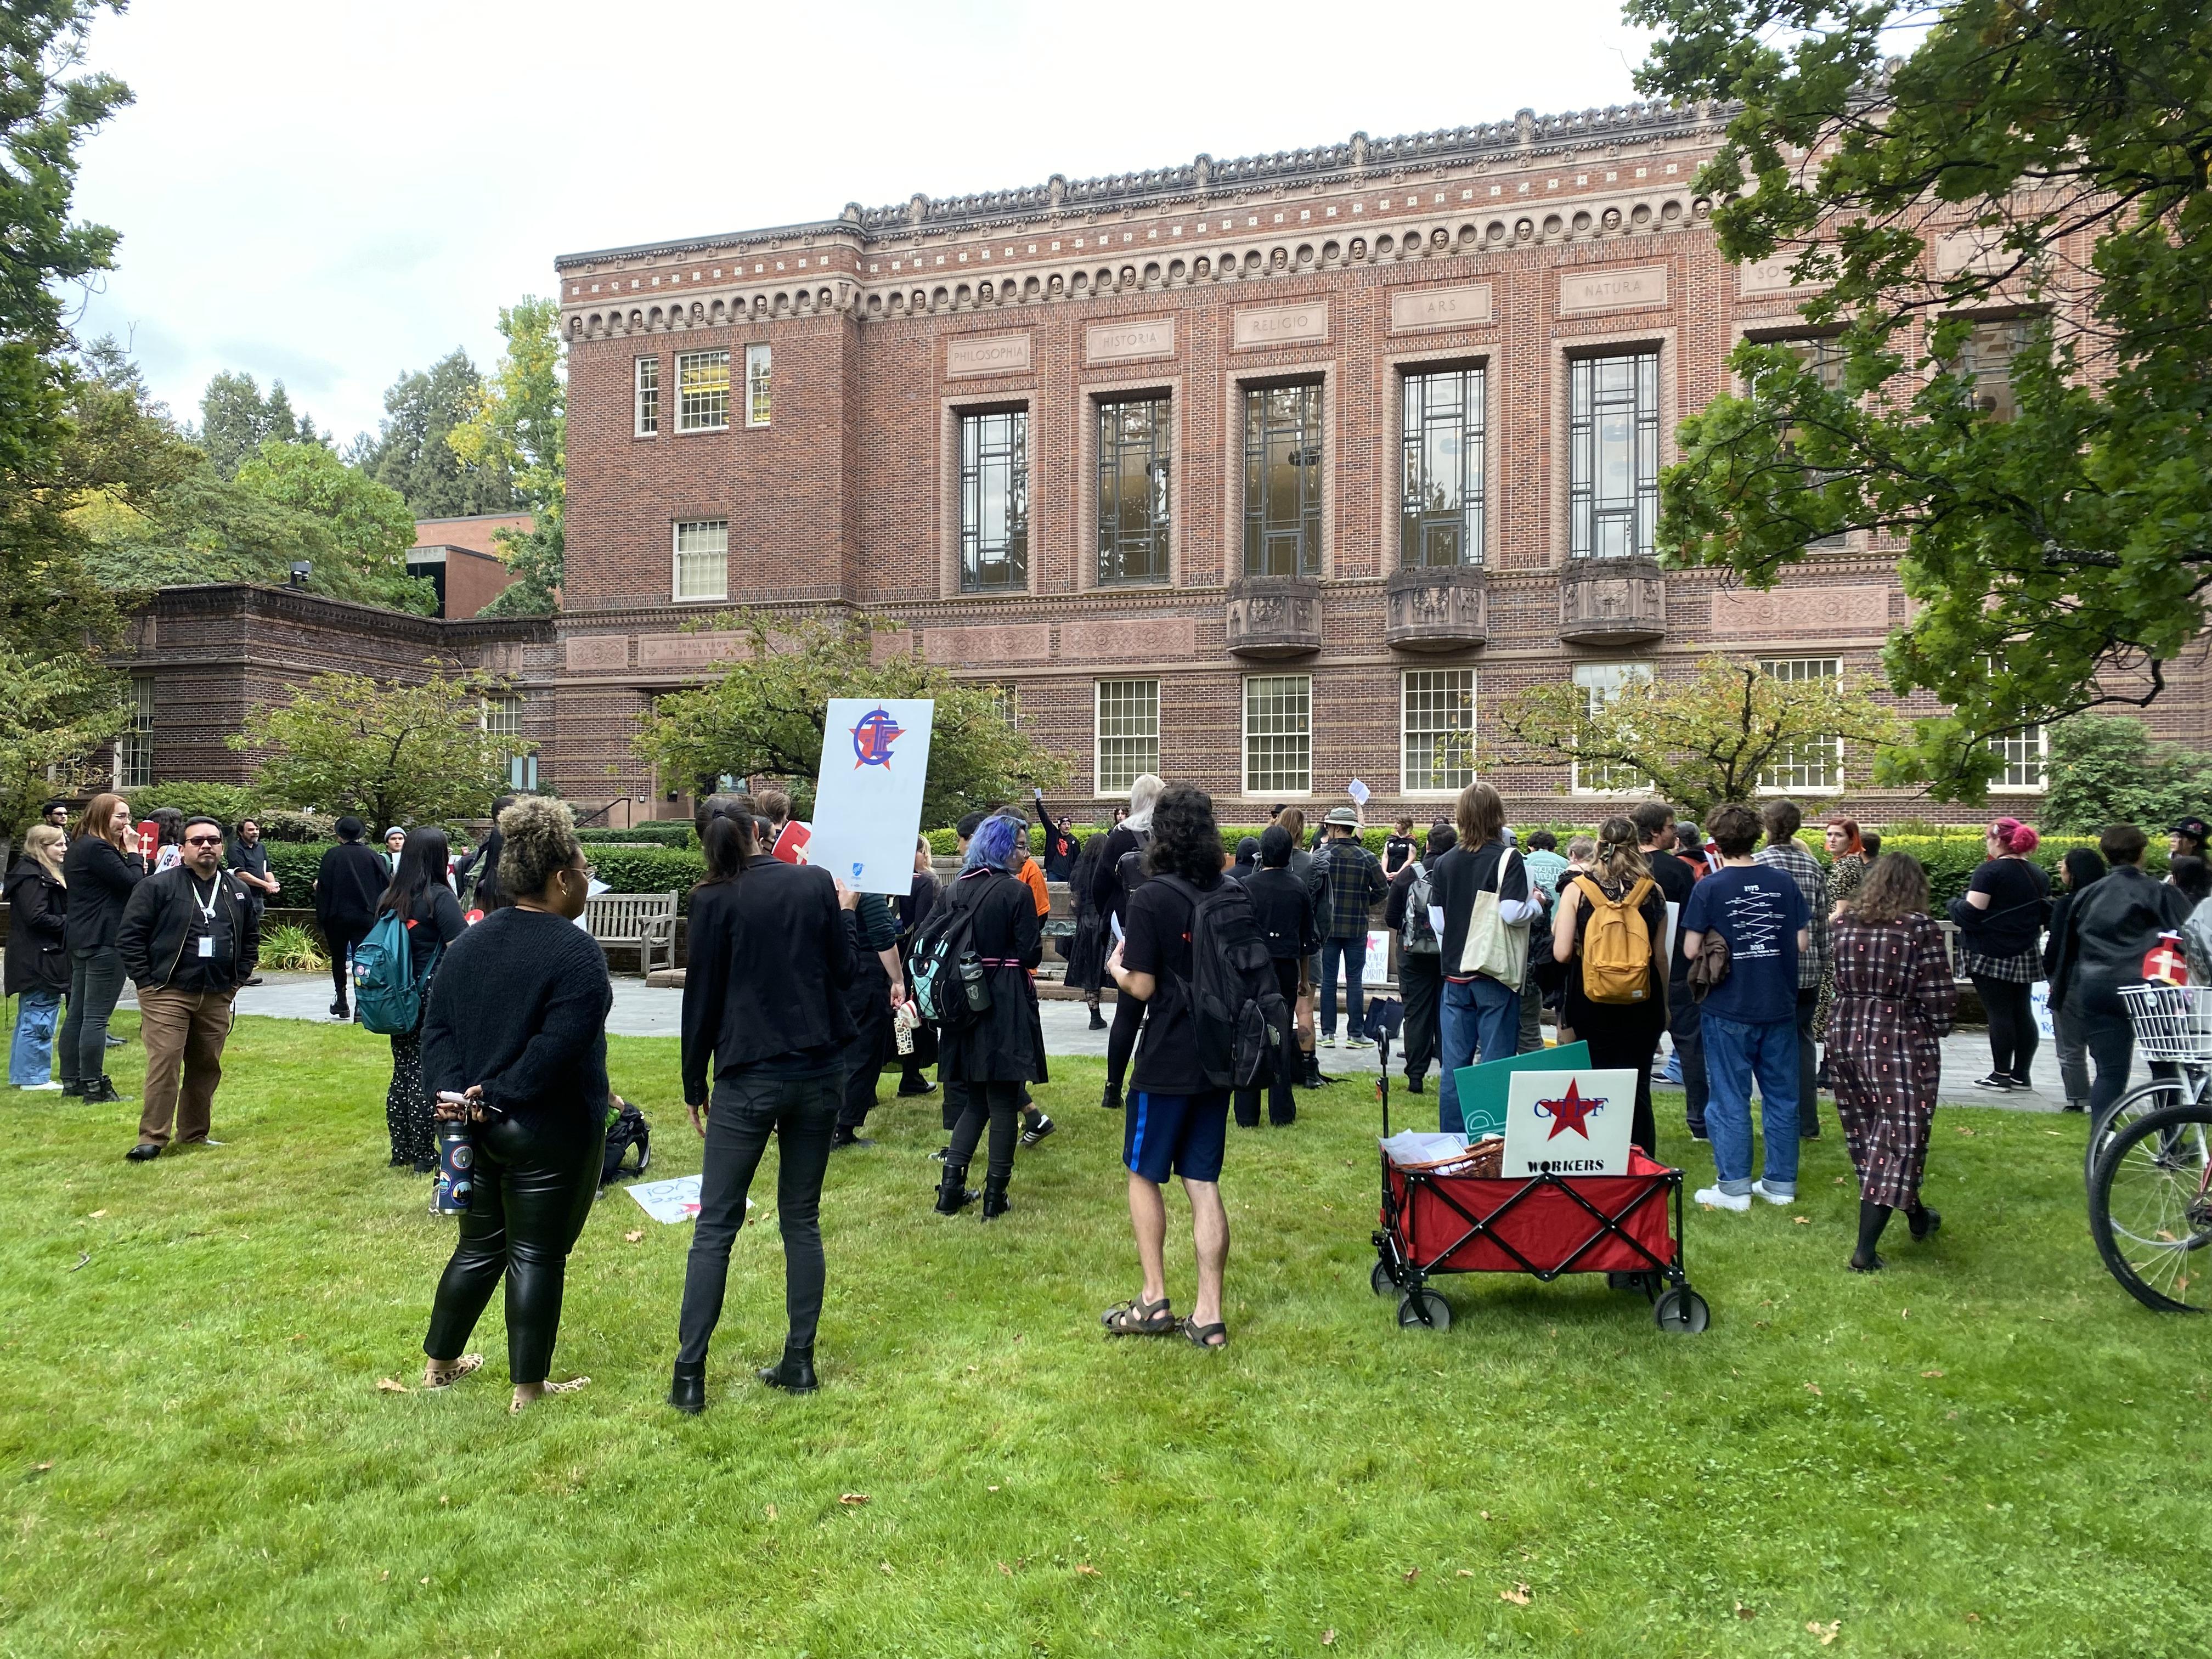 A crowd of protesters, dressed in black, gathered on the lawn outside of the Knight Library. Many people were graduate students / members of GTFF, but there were also a handful of bystanders or supporters that participated.